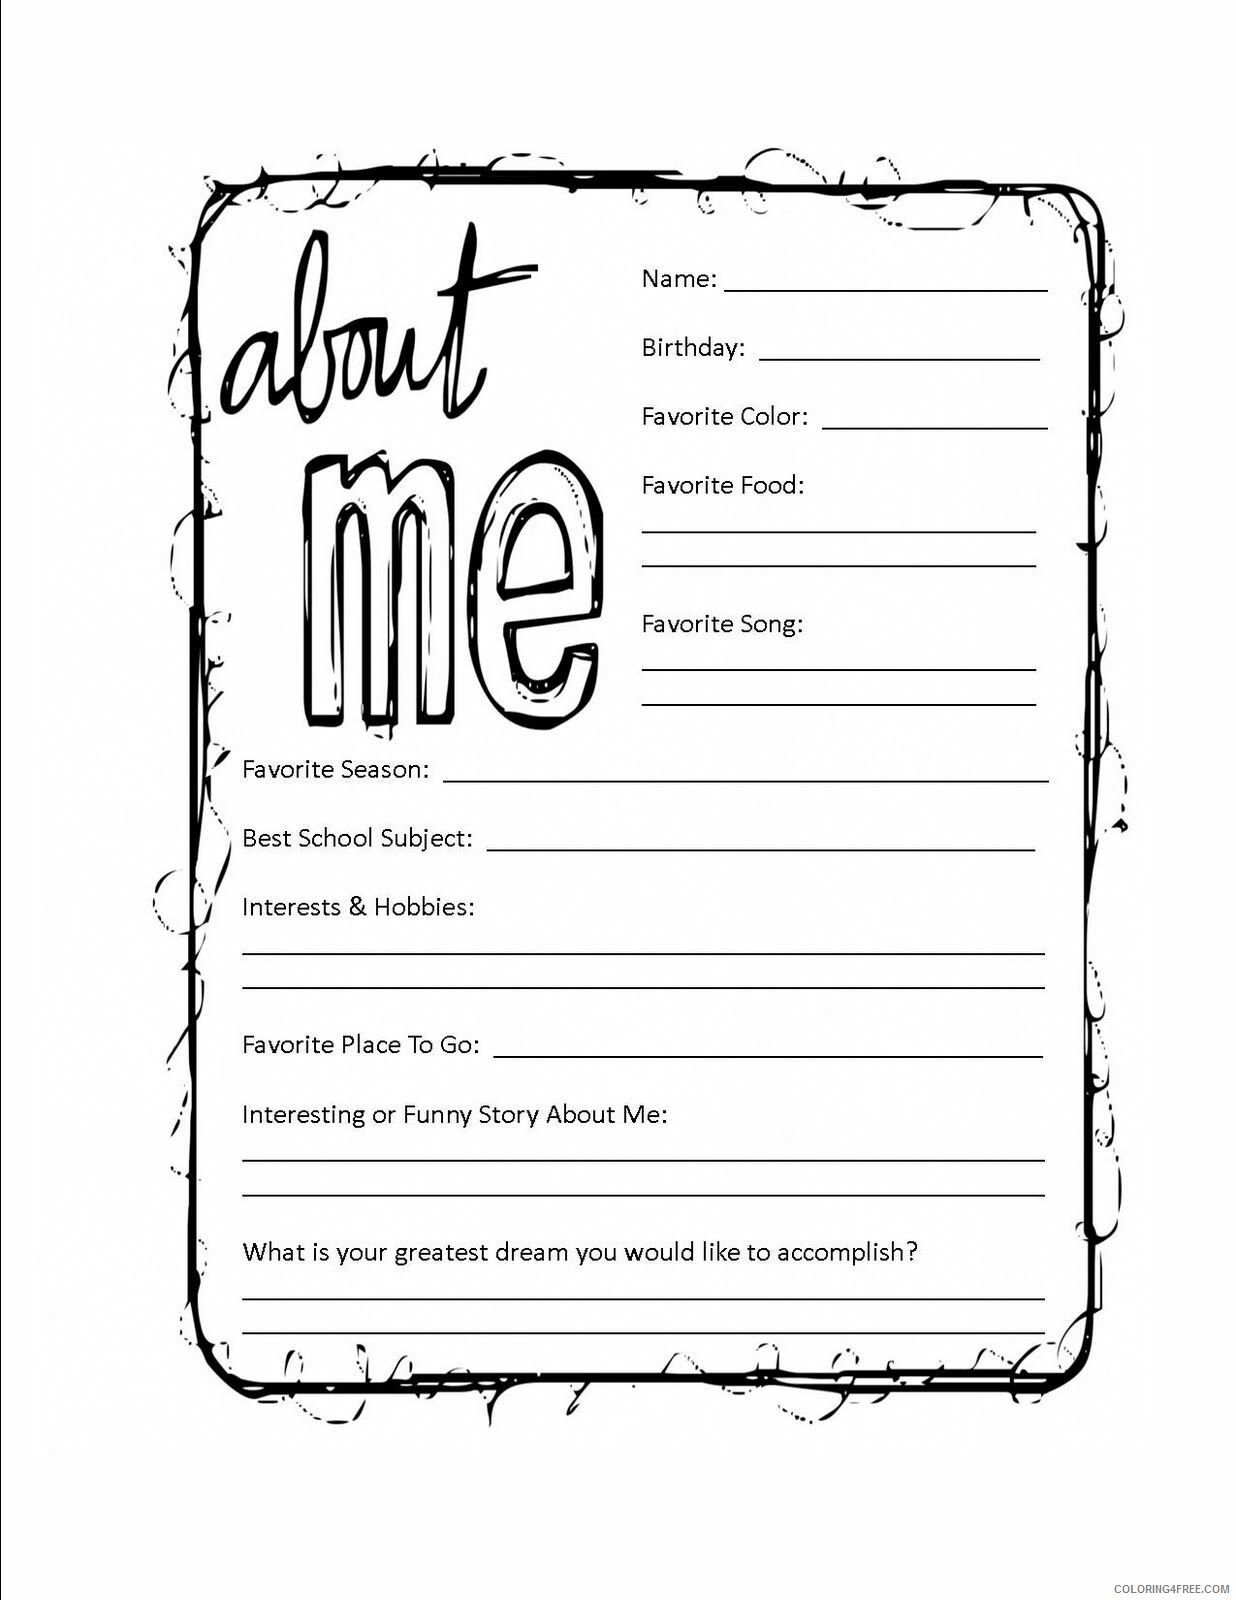 All About Me Coloring Pages Printable Sheets About me worksheet jpg 2021 a 3871 Coloring4free